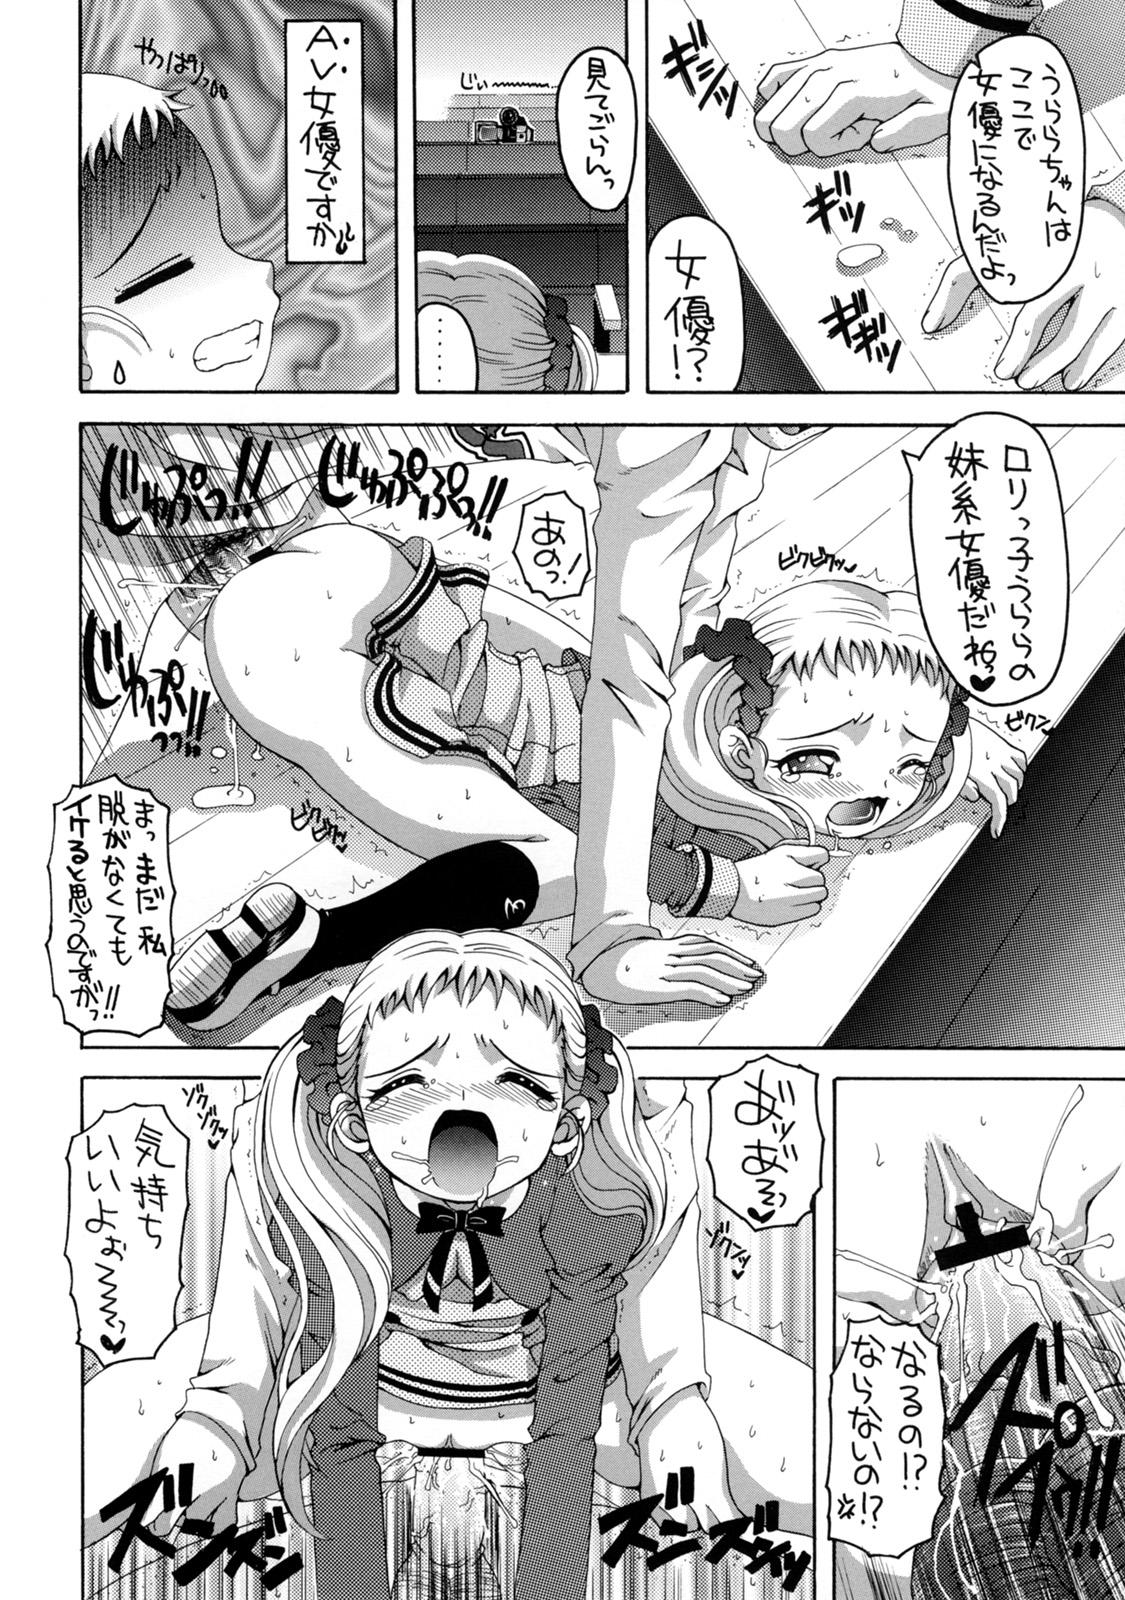 Teen Blowjob Yes! Five 3 - Pretty cure Yes precure 5 Cumming - Page 11